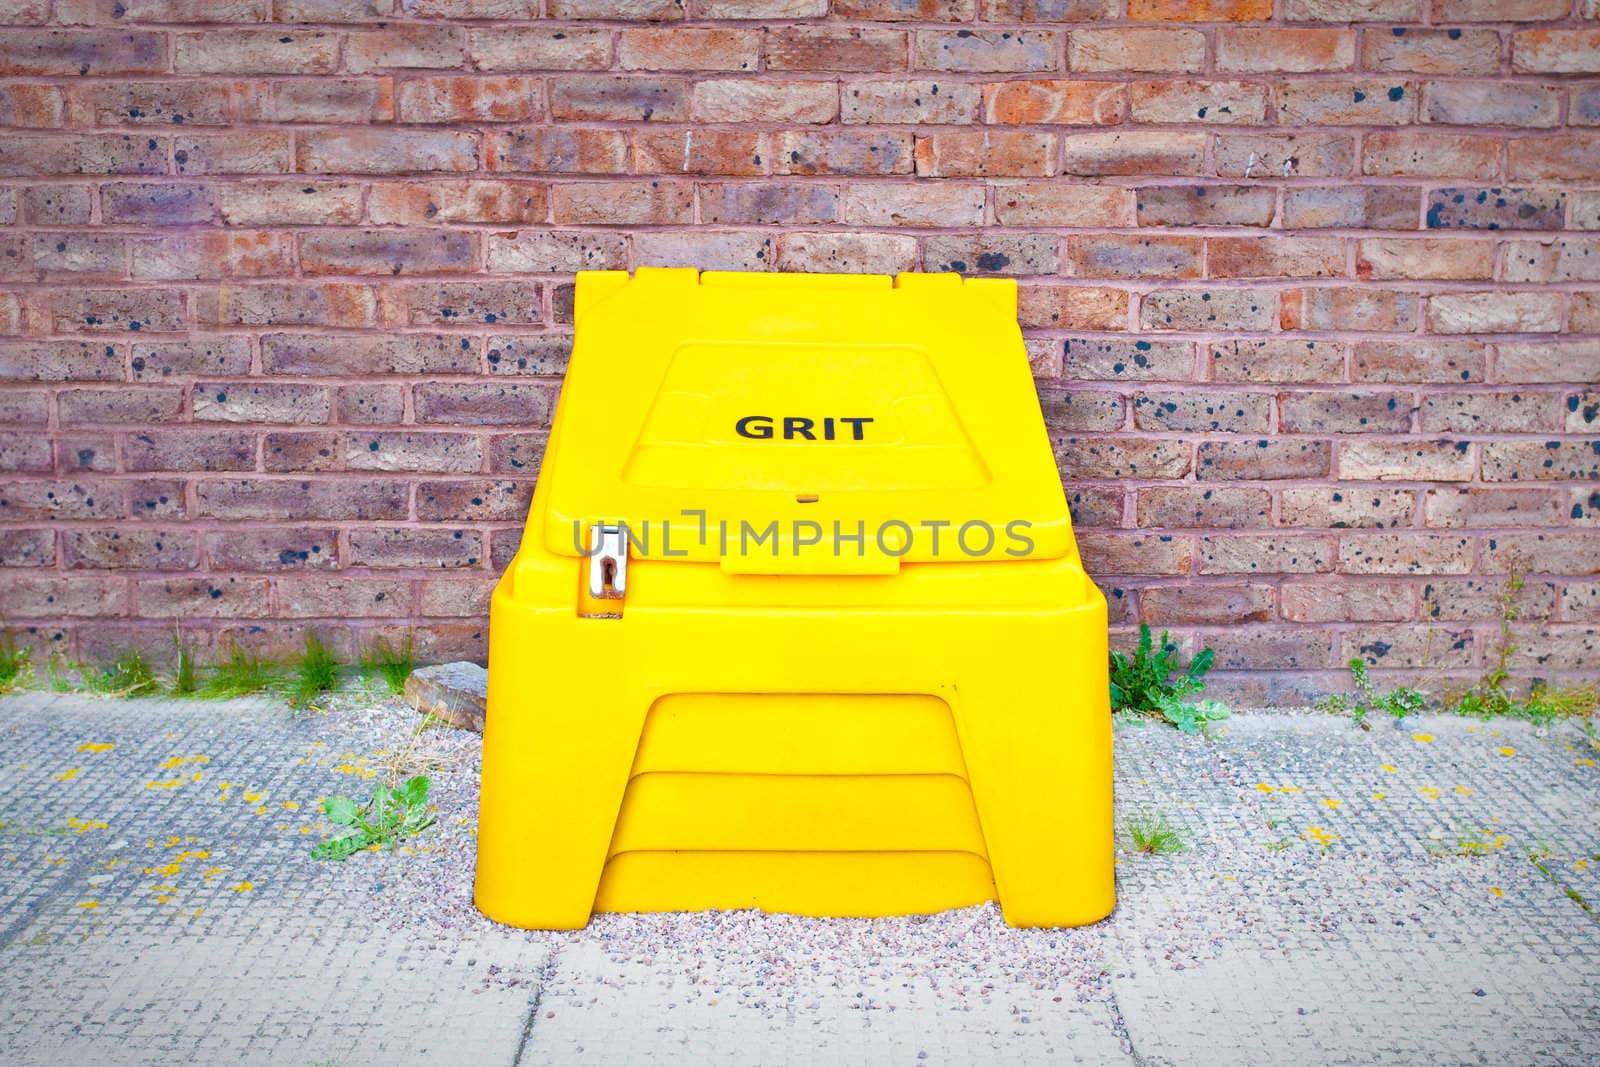 Yellow crate containing salt for de-icing roads in the cold weather